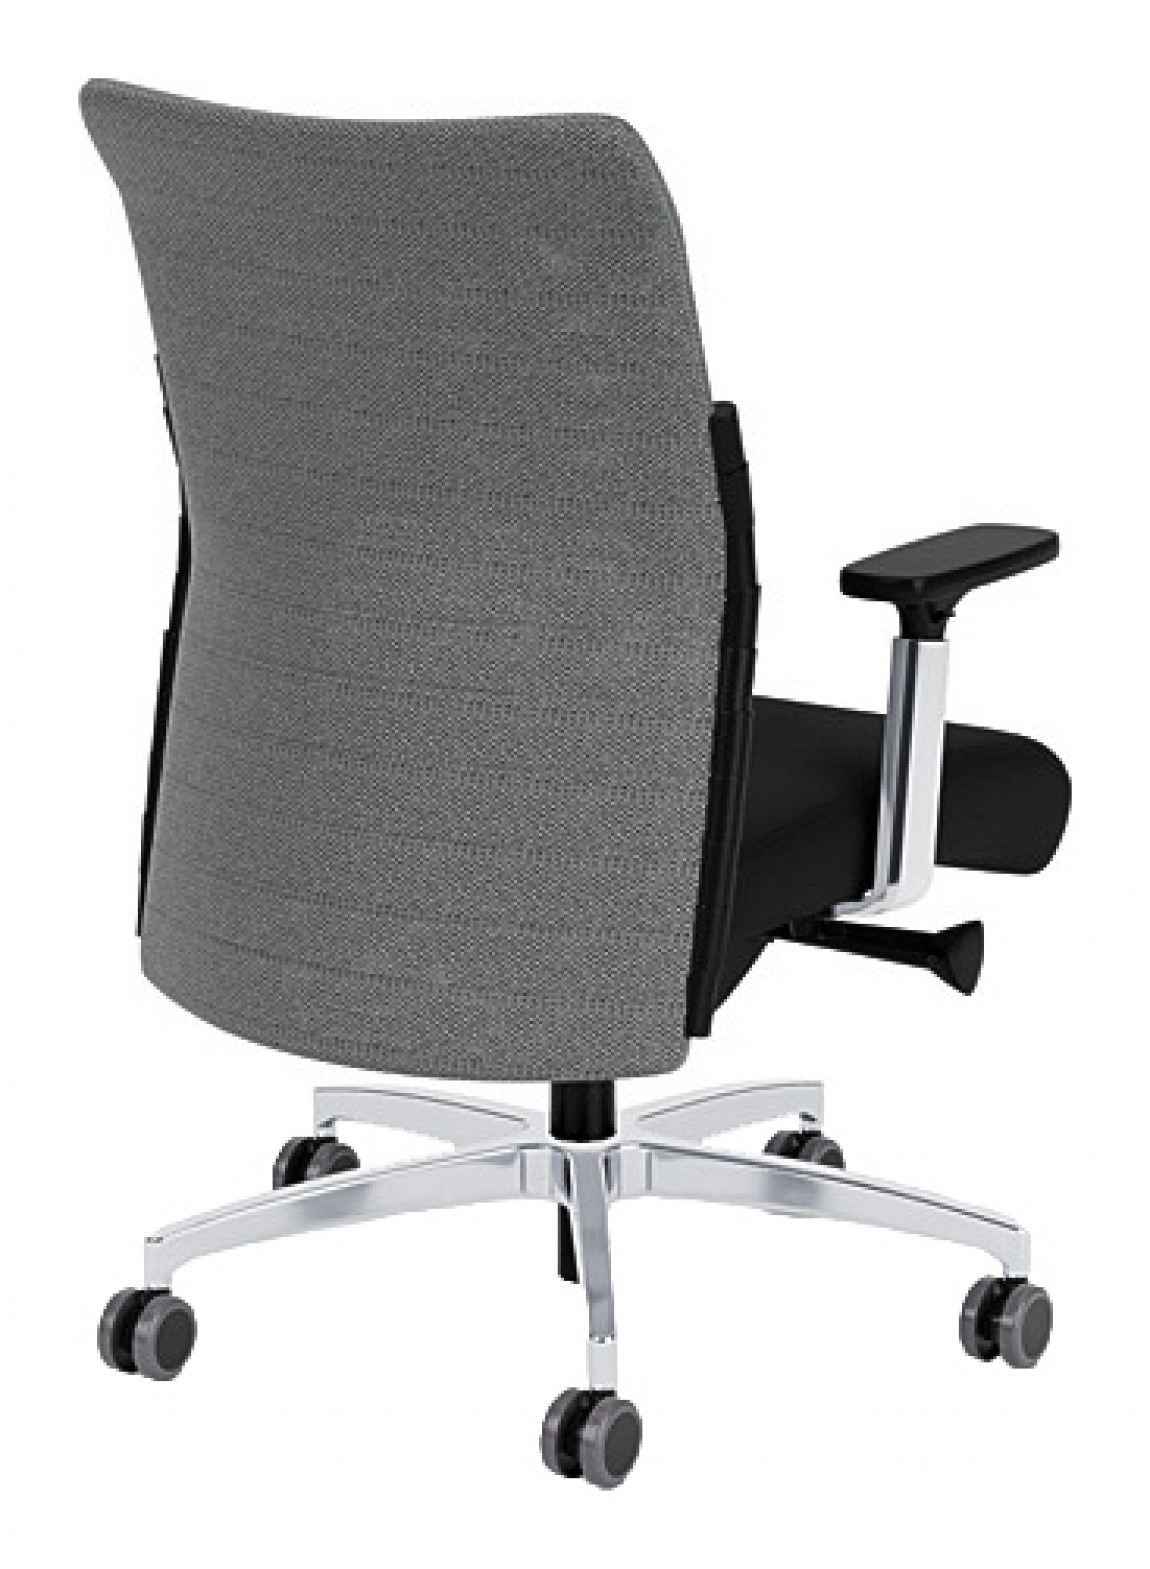 Mesh Back Adjustable Office Chair